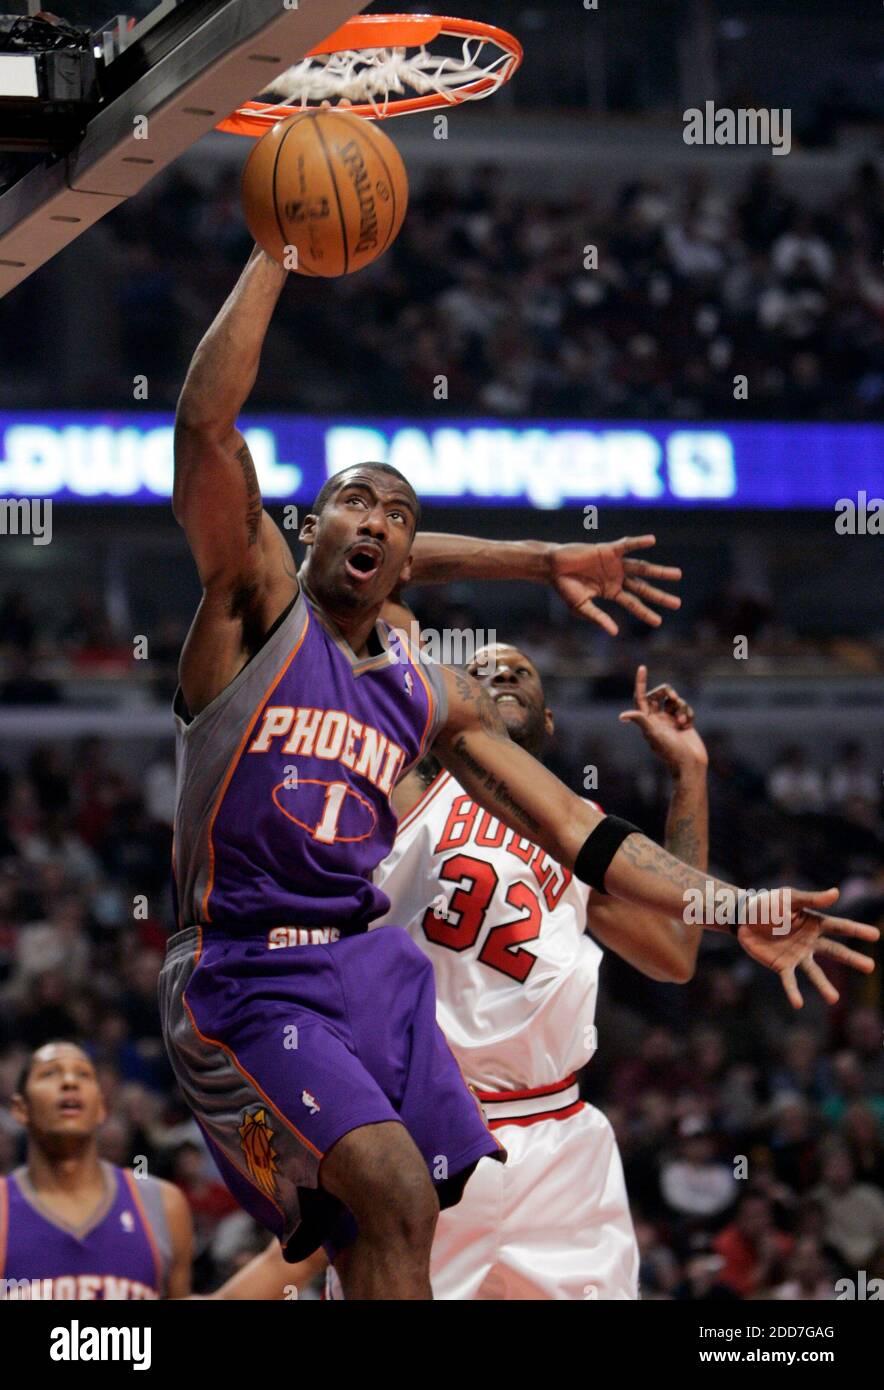 NO FILM, NO VIDEO, NO TV, NO DOCUMENTARY - The Phoenix Suns' Amare  Stoudemire (1) gets past Chicago Bulls defender Joe Smith (32) for the dunk  in the first quarter at the